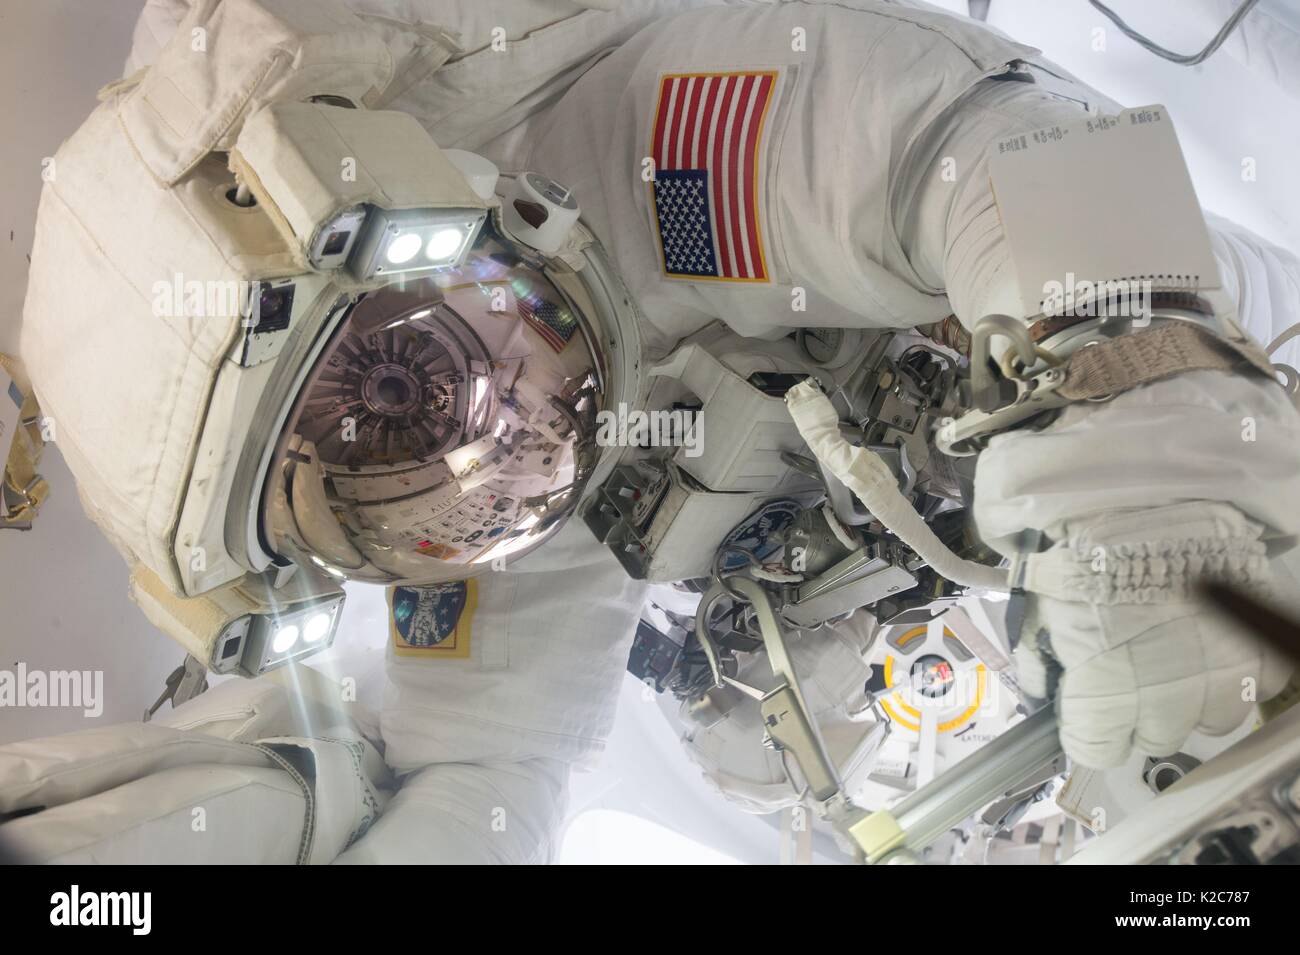 NASA International Space Station Expedition 51 prime crew member American astronaut Jack Fischer wears a spacesuit in the Quest airlock in preparation for an EVA spacewalk May 12, 2017 in Earth orbit. Stock Photo